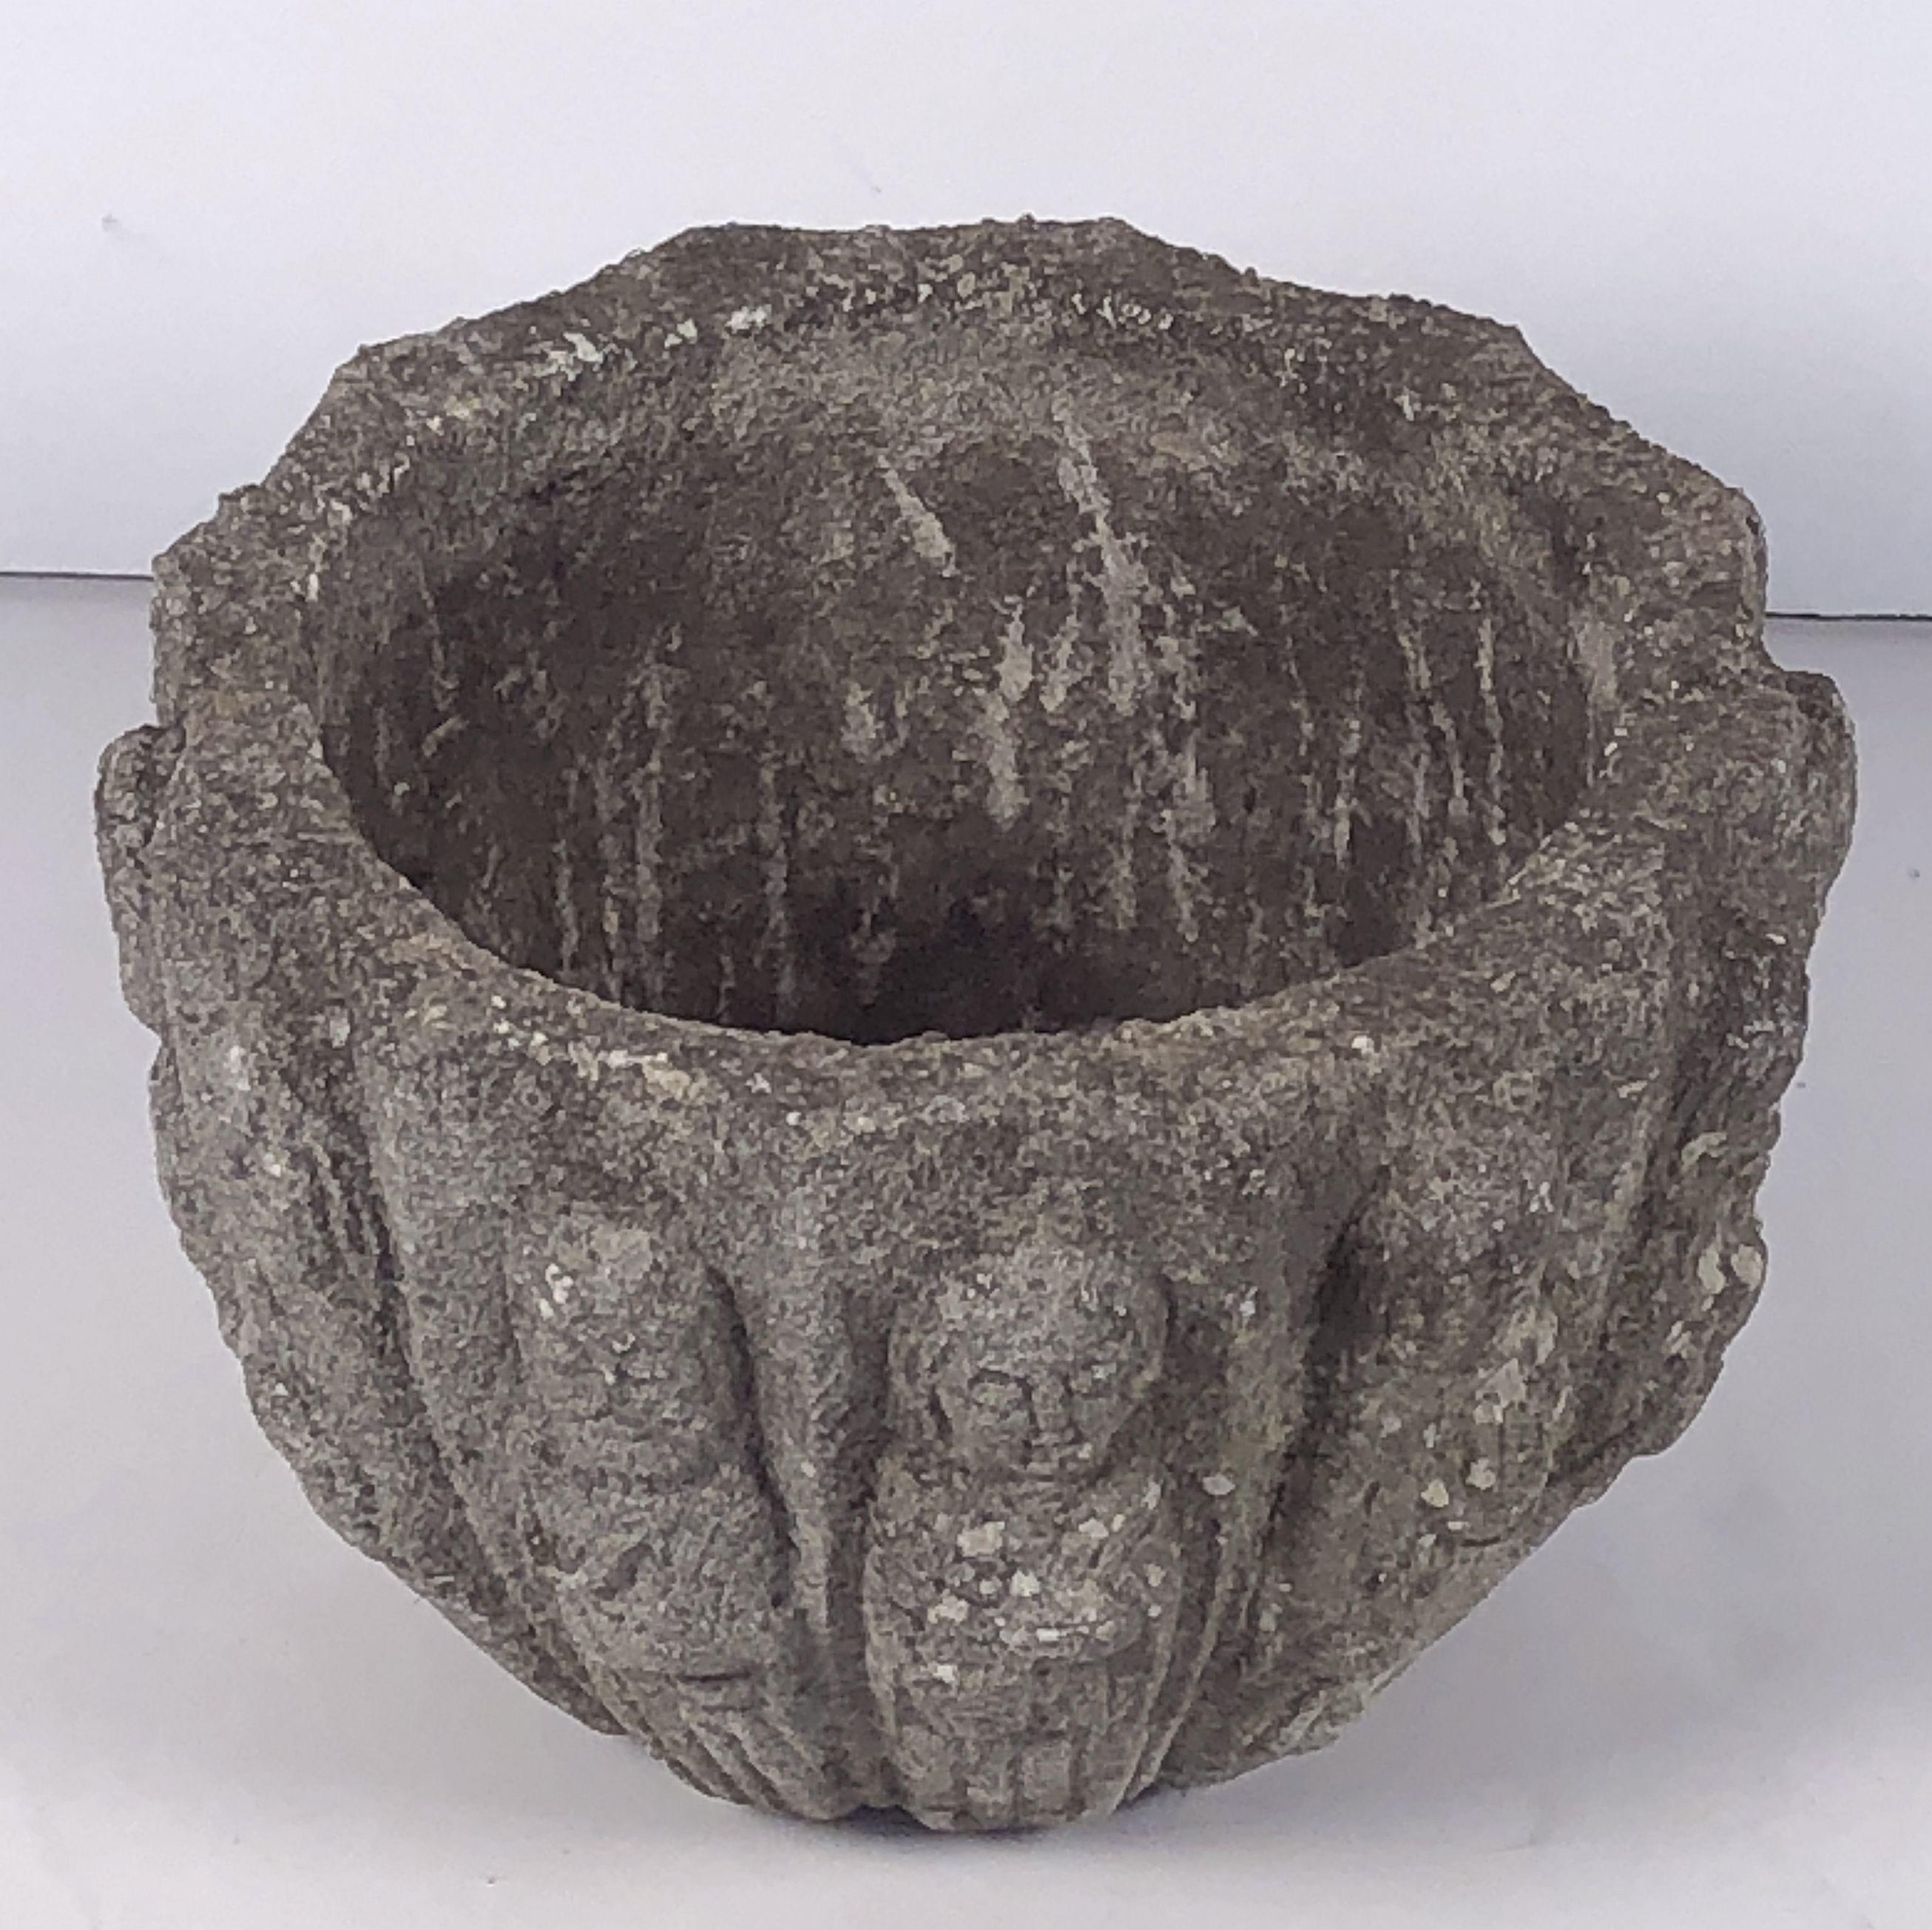 A fine English circular garden pot or planter urn of composition stone, featuring a weathered exterior relief of the Twelve Apostles around the circumference.

A compelling addition to an indoor or outdoor garden room, garden, or patio.